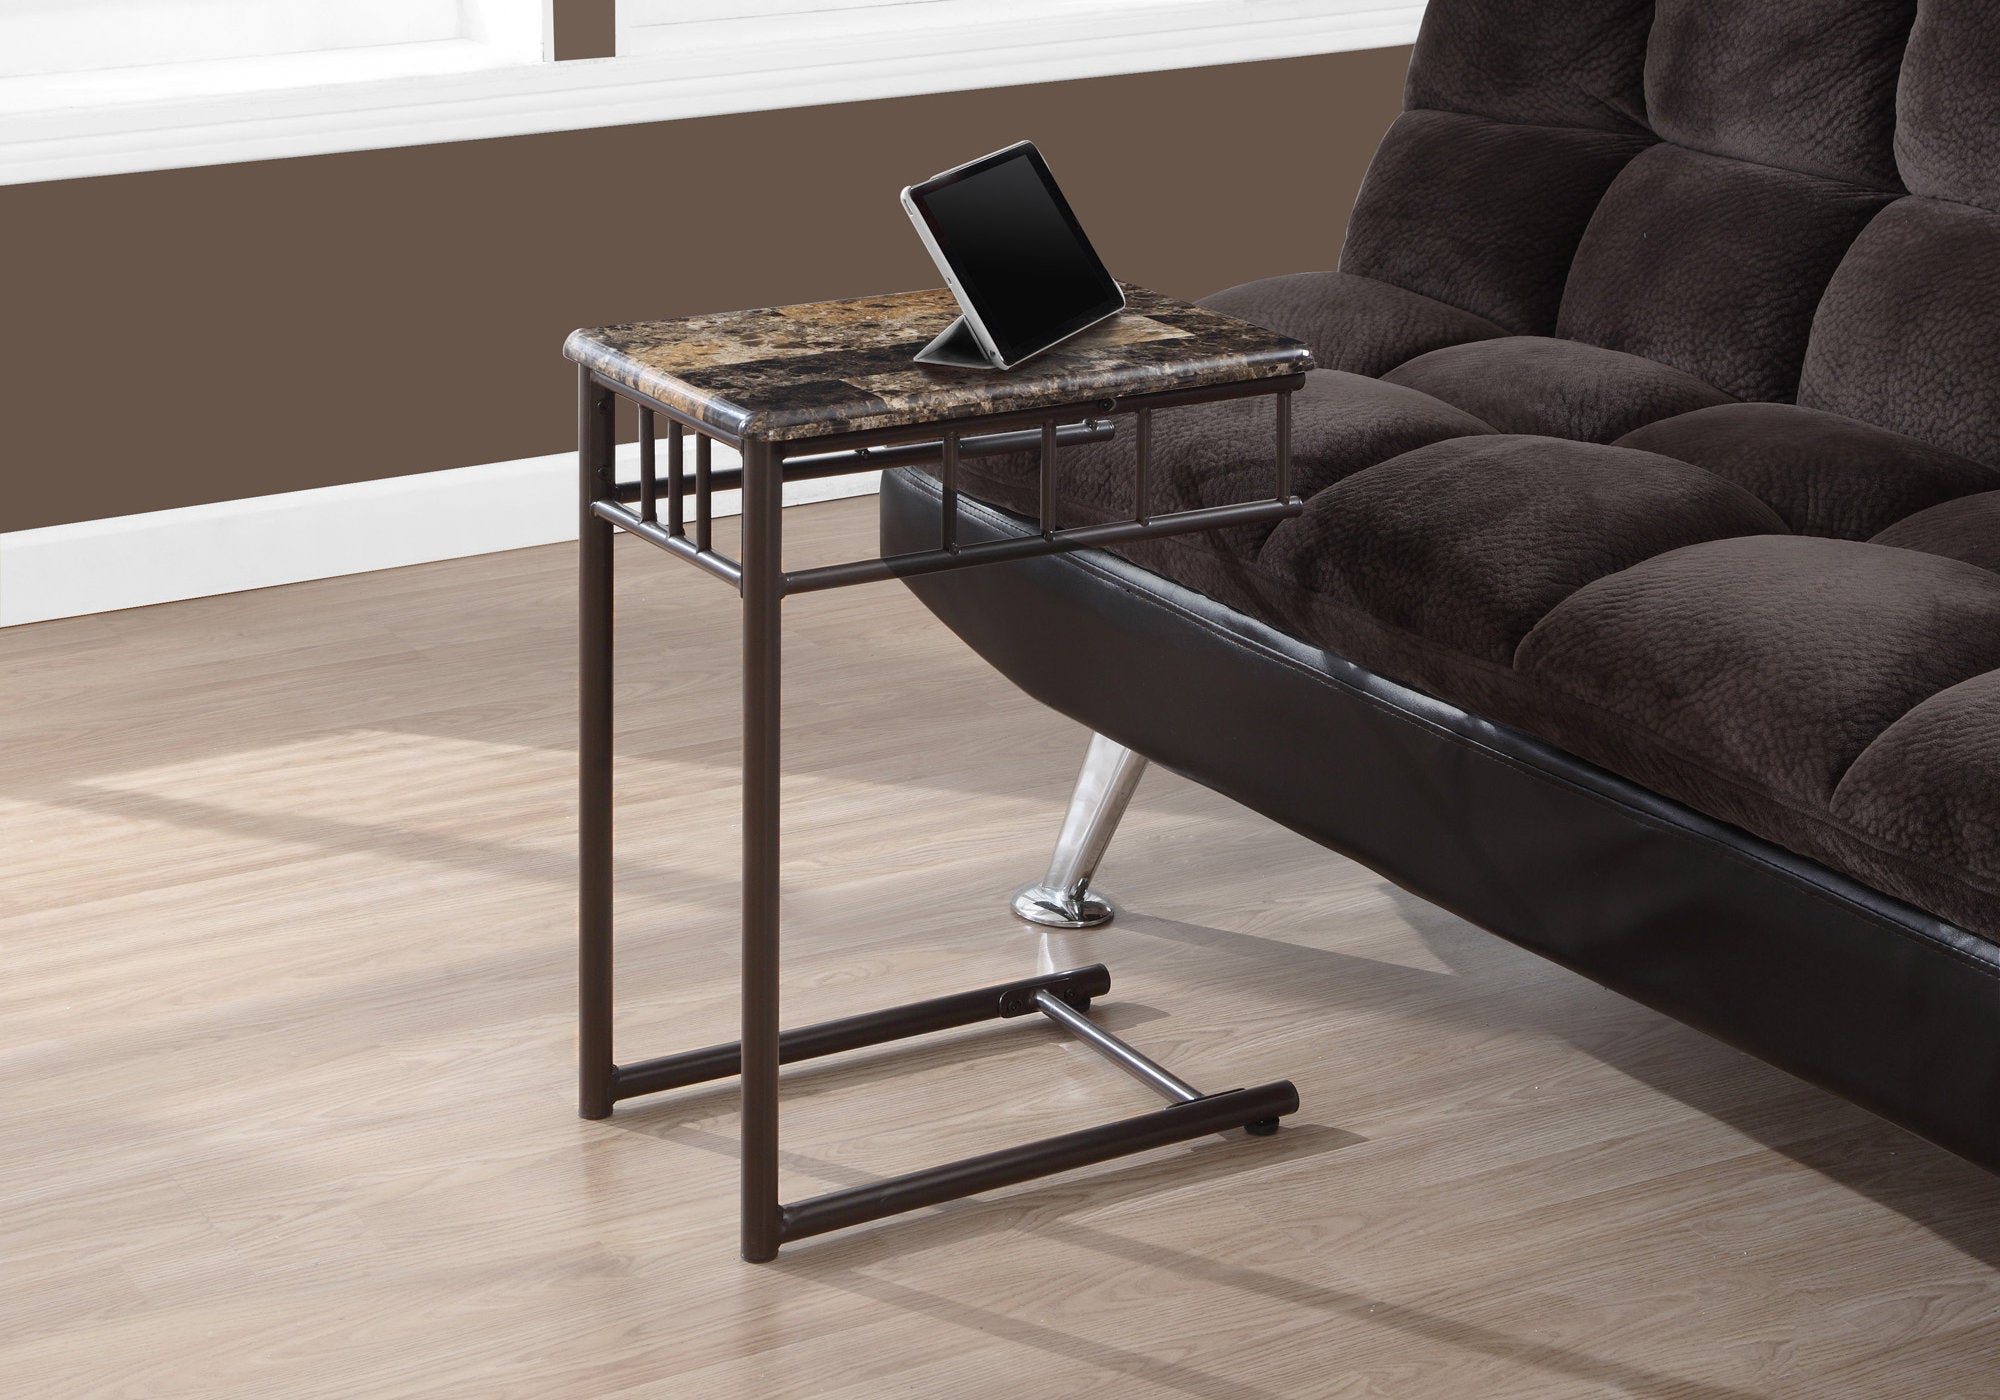 MN-893043    Accent Table, Side, End, Plsant Stand, Square, Living Room, Bedroom, Metal Legs, Laminate, Brown Marble Look, Bronze, Traditional